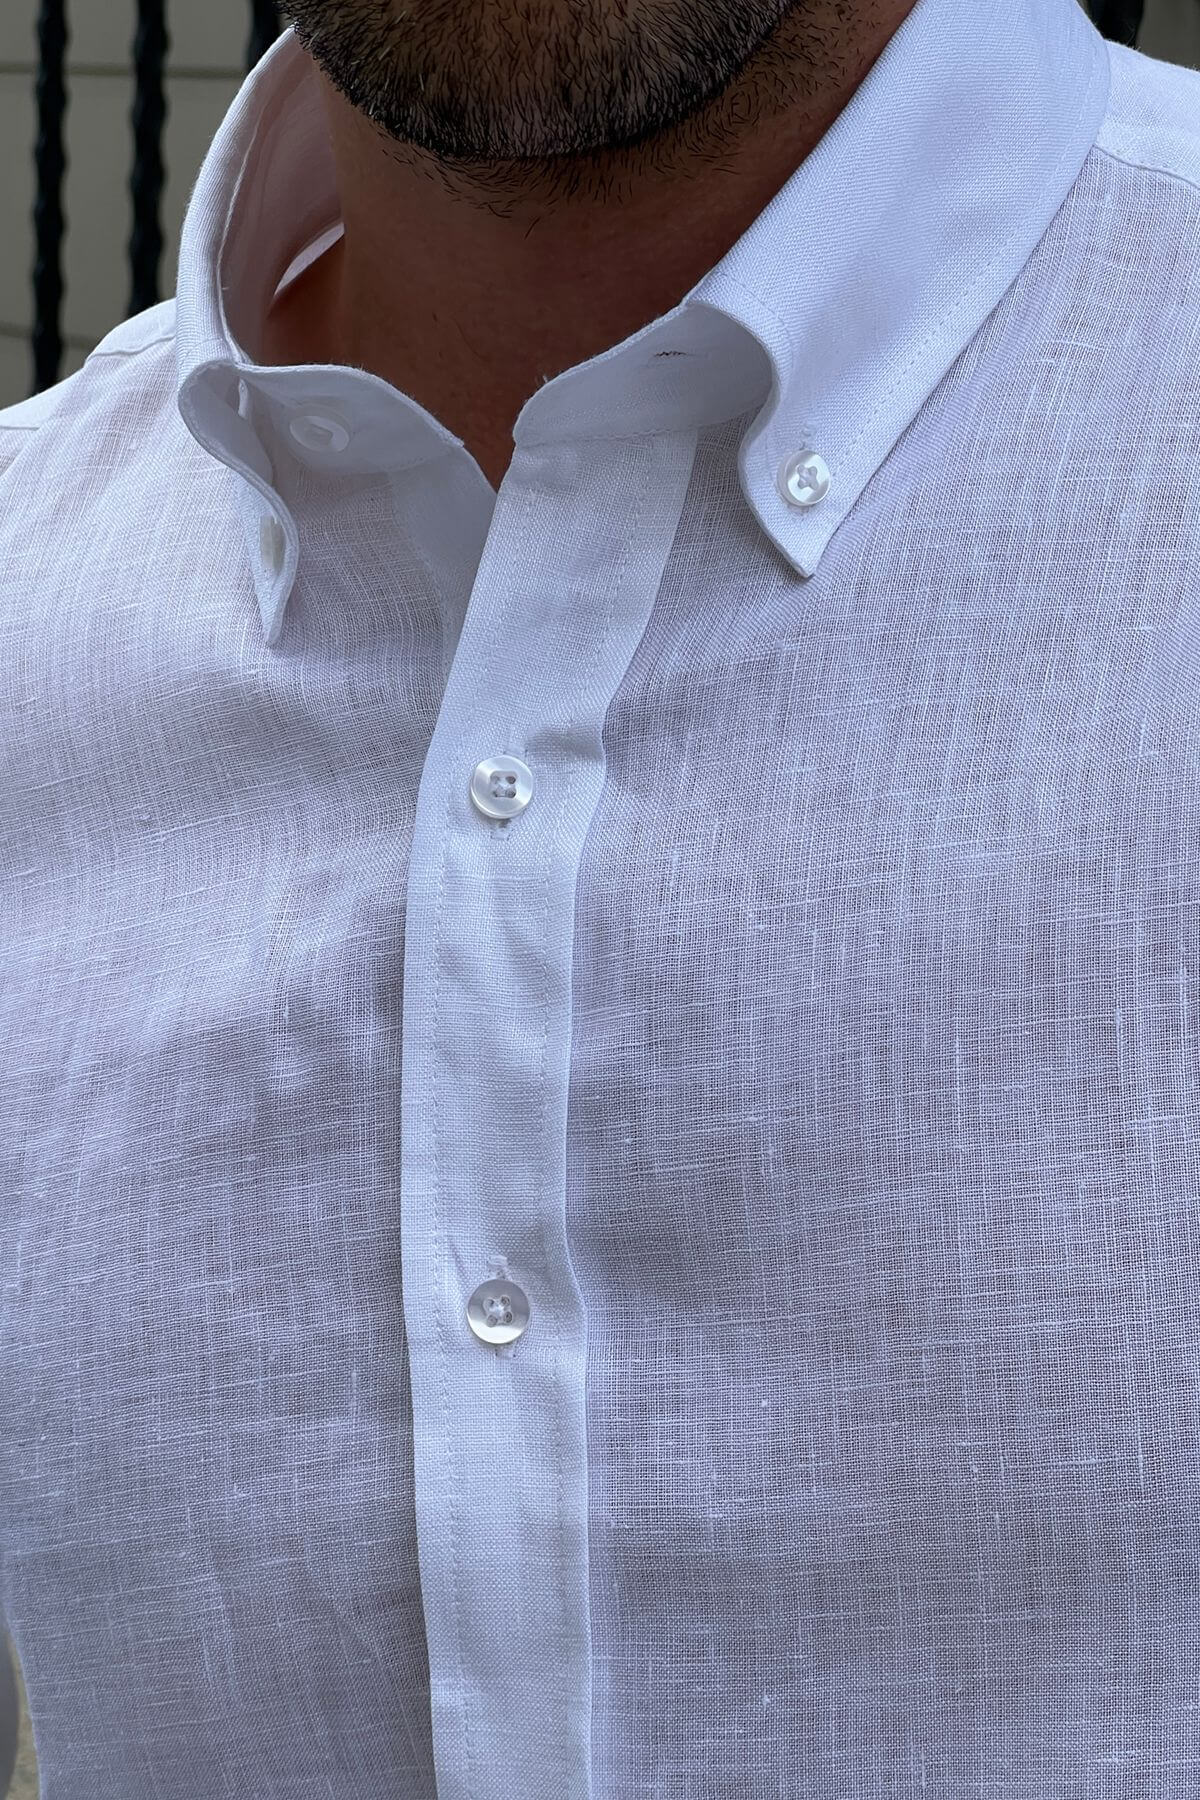 A White Linen Shirt on display